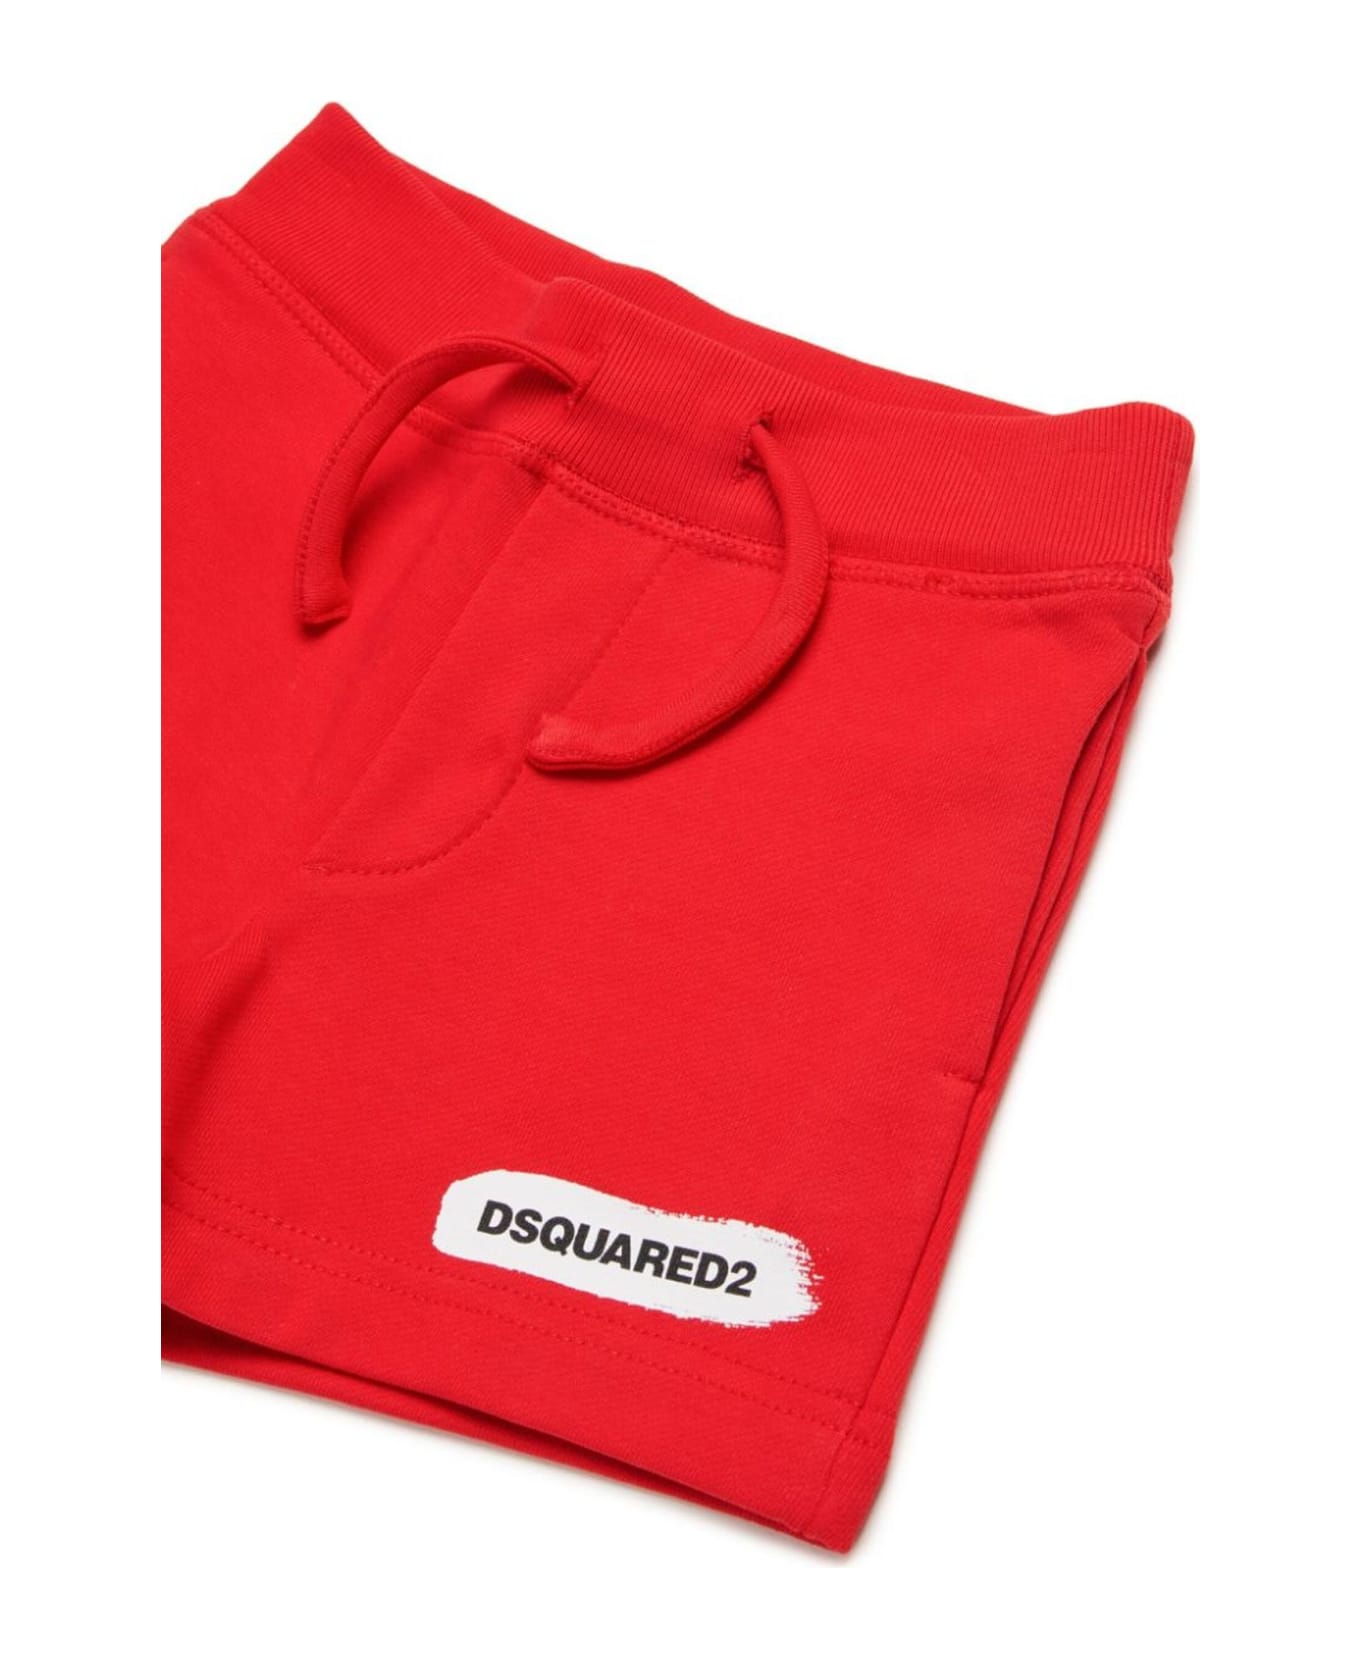 Dsquared2 Shorts Red - Red ボトムス